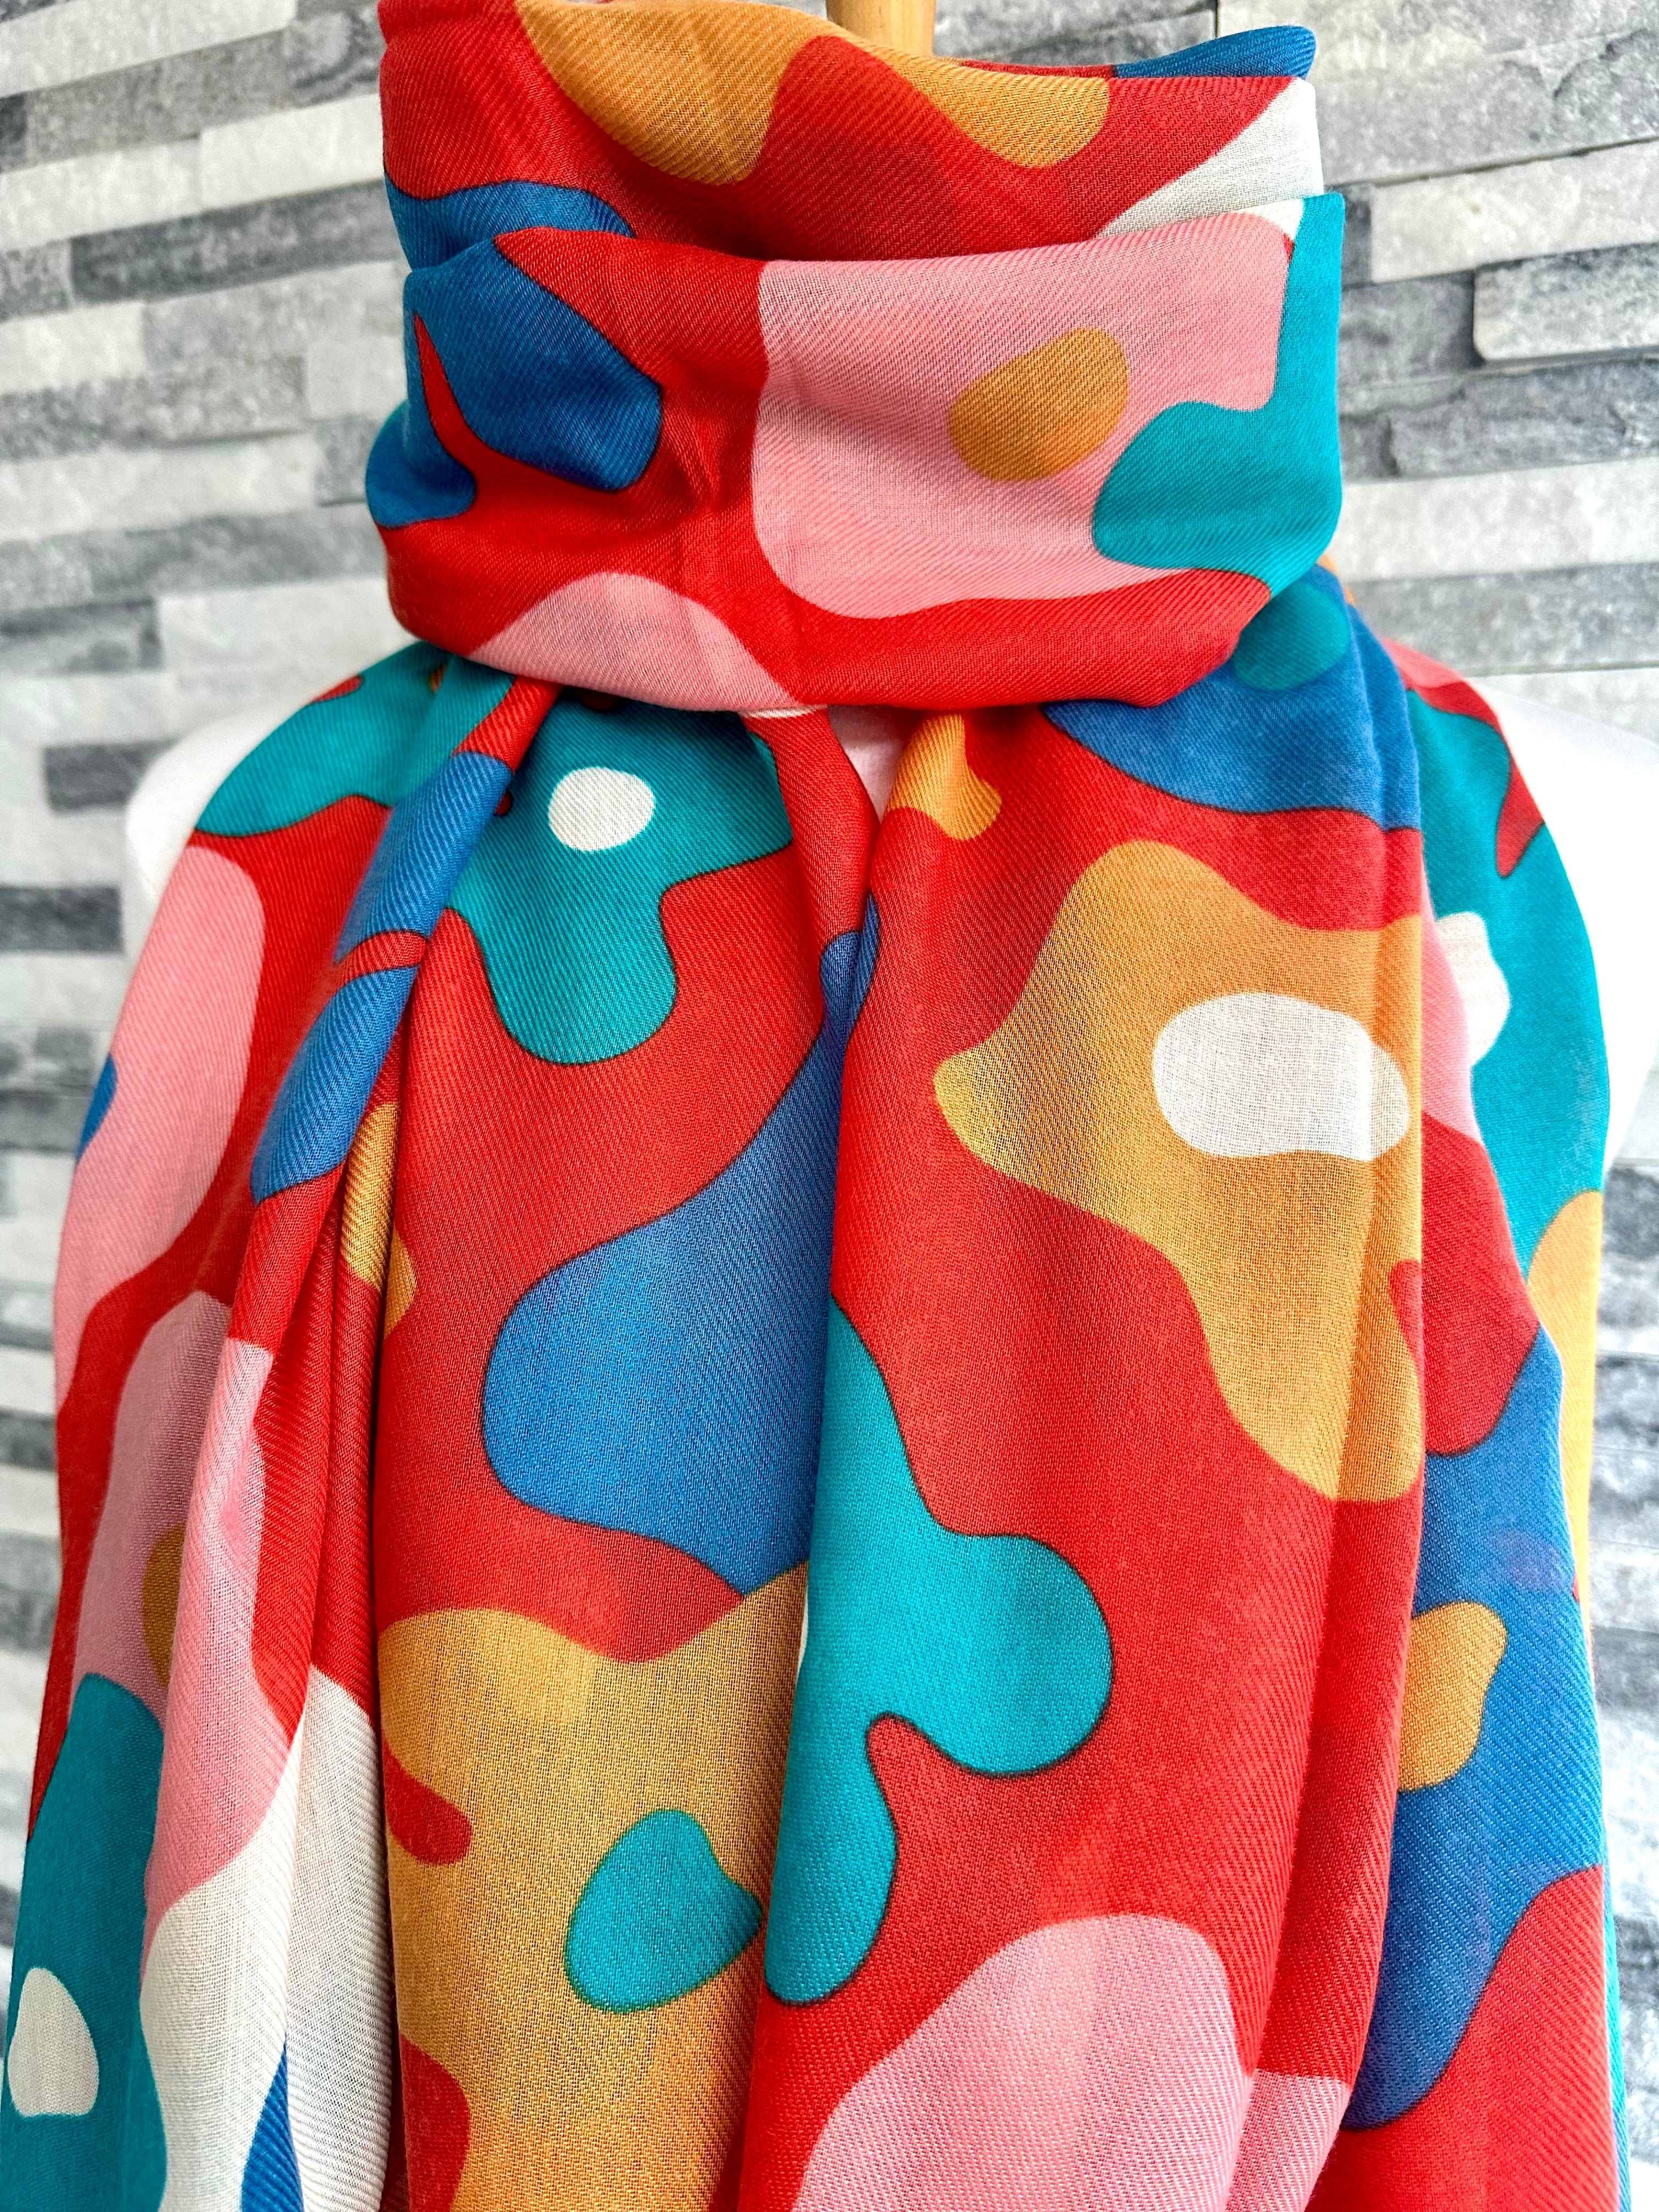 lusciousscarves Red Cuckoo Floral Splodge Scarf, Red, Turquoise, Mustard and Pale Pink